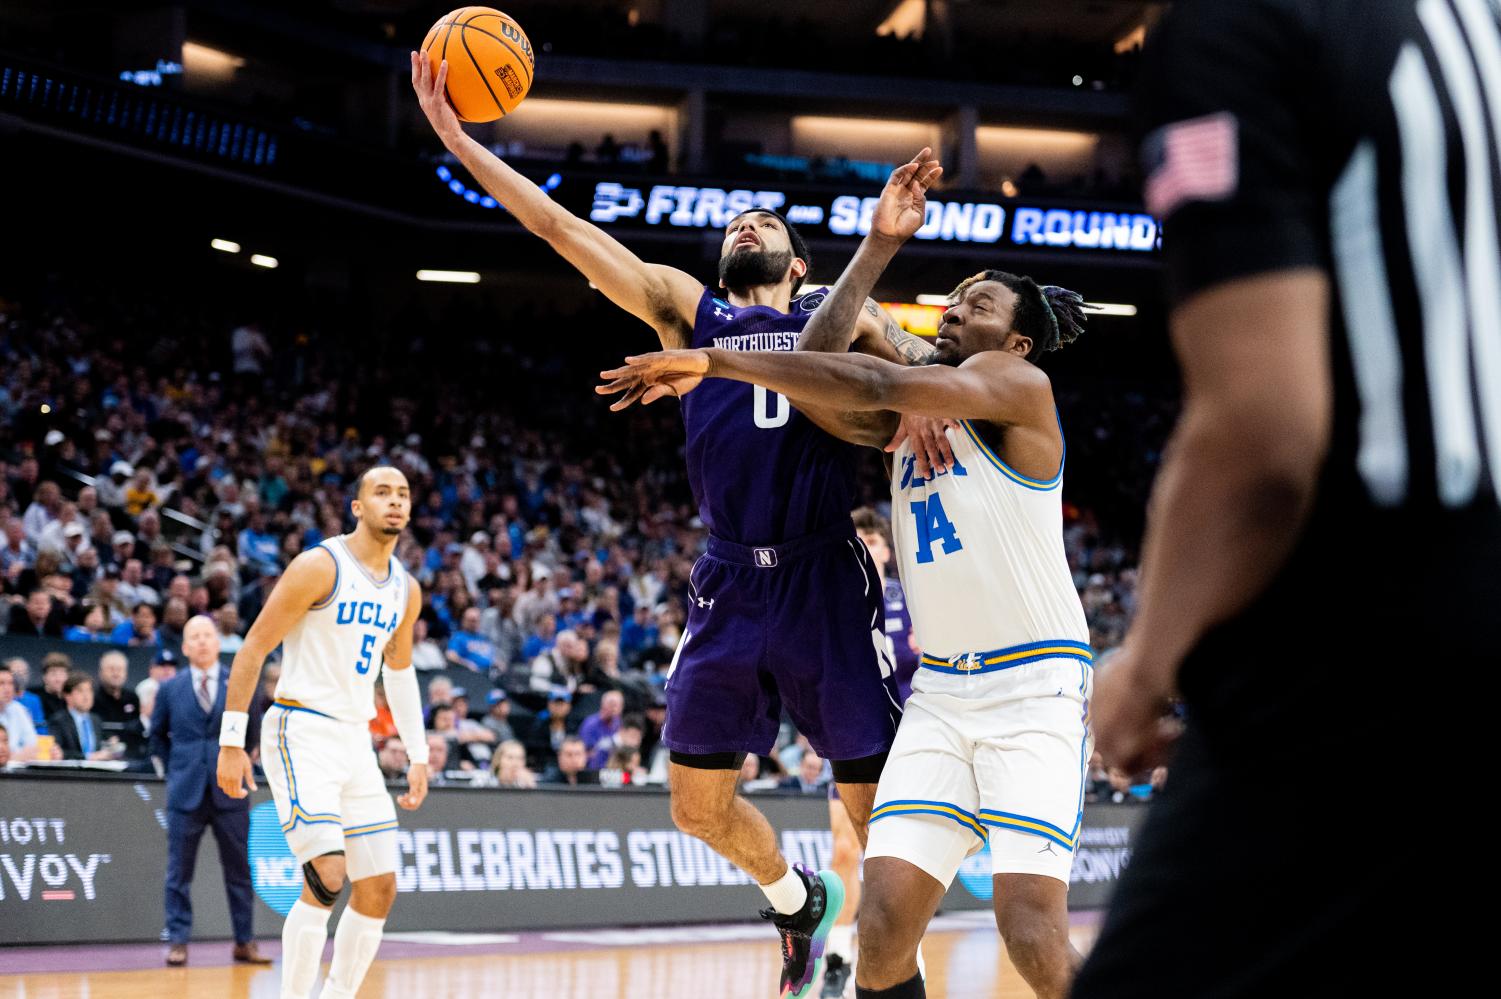 A player in purple jumps up to catch a basketball while pushing another player in white away.